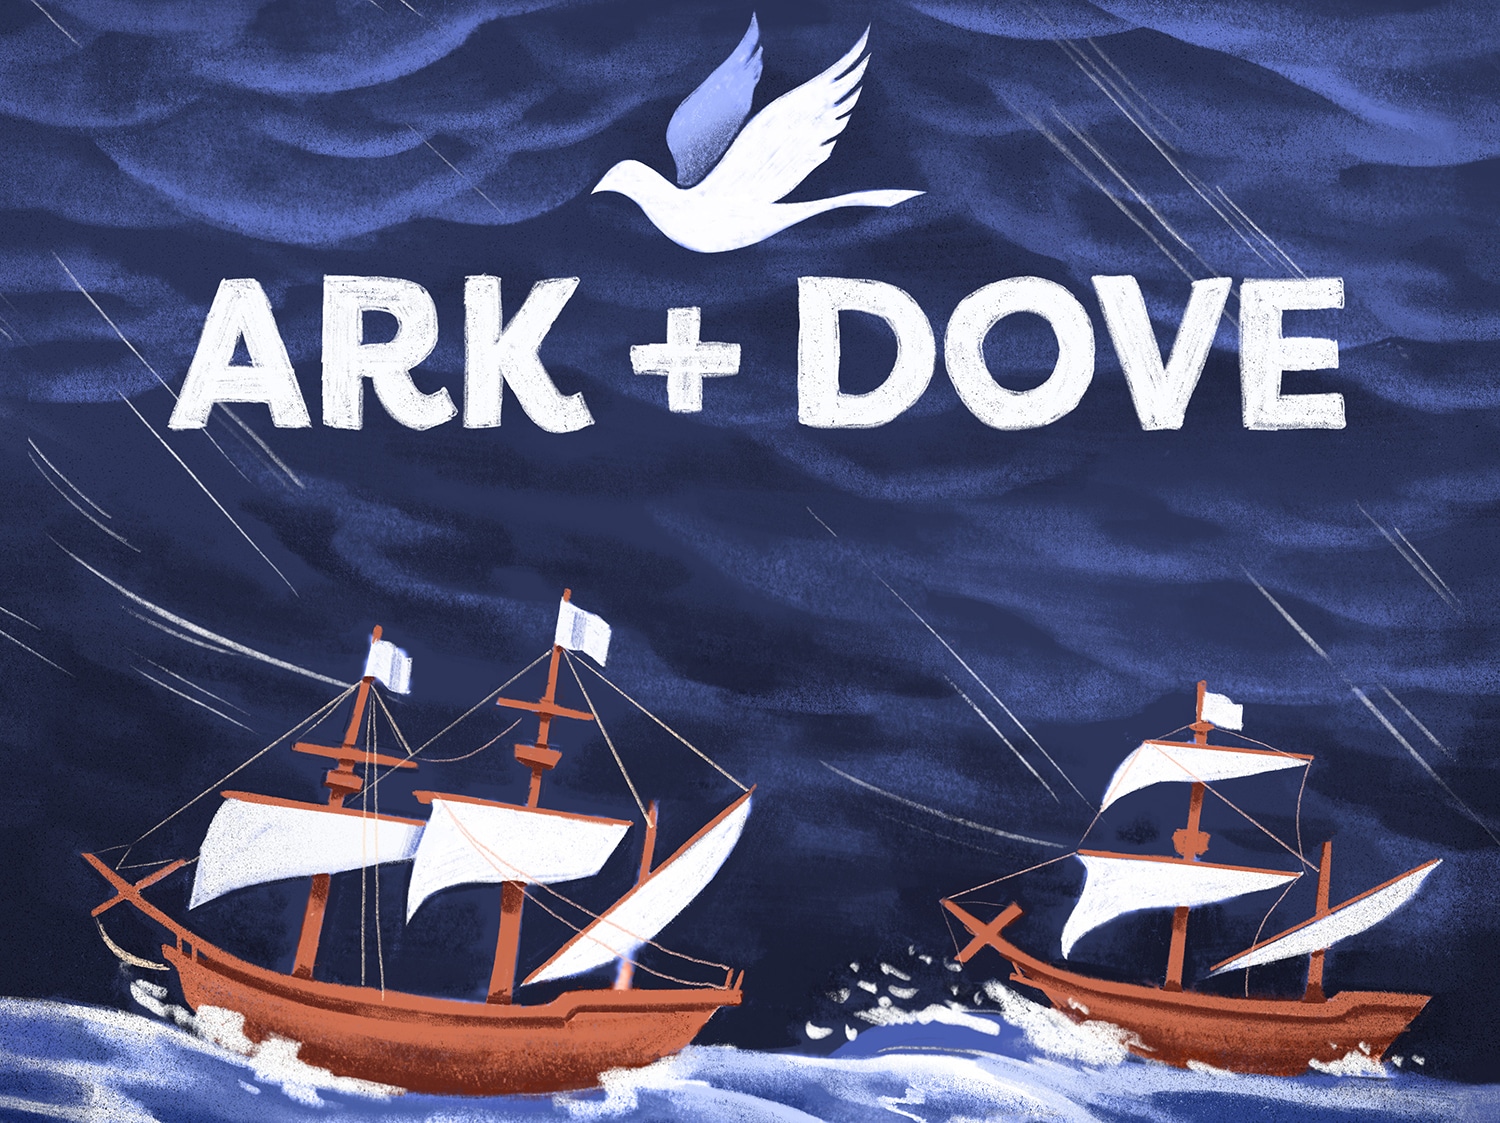 The logo for the Ark and Dove podcast--two ships on a dark, stormy sea with a dove flying overhead